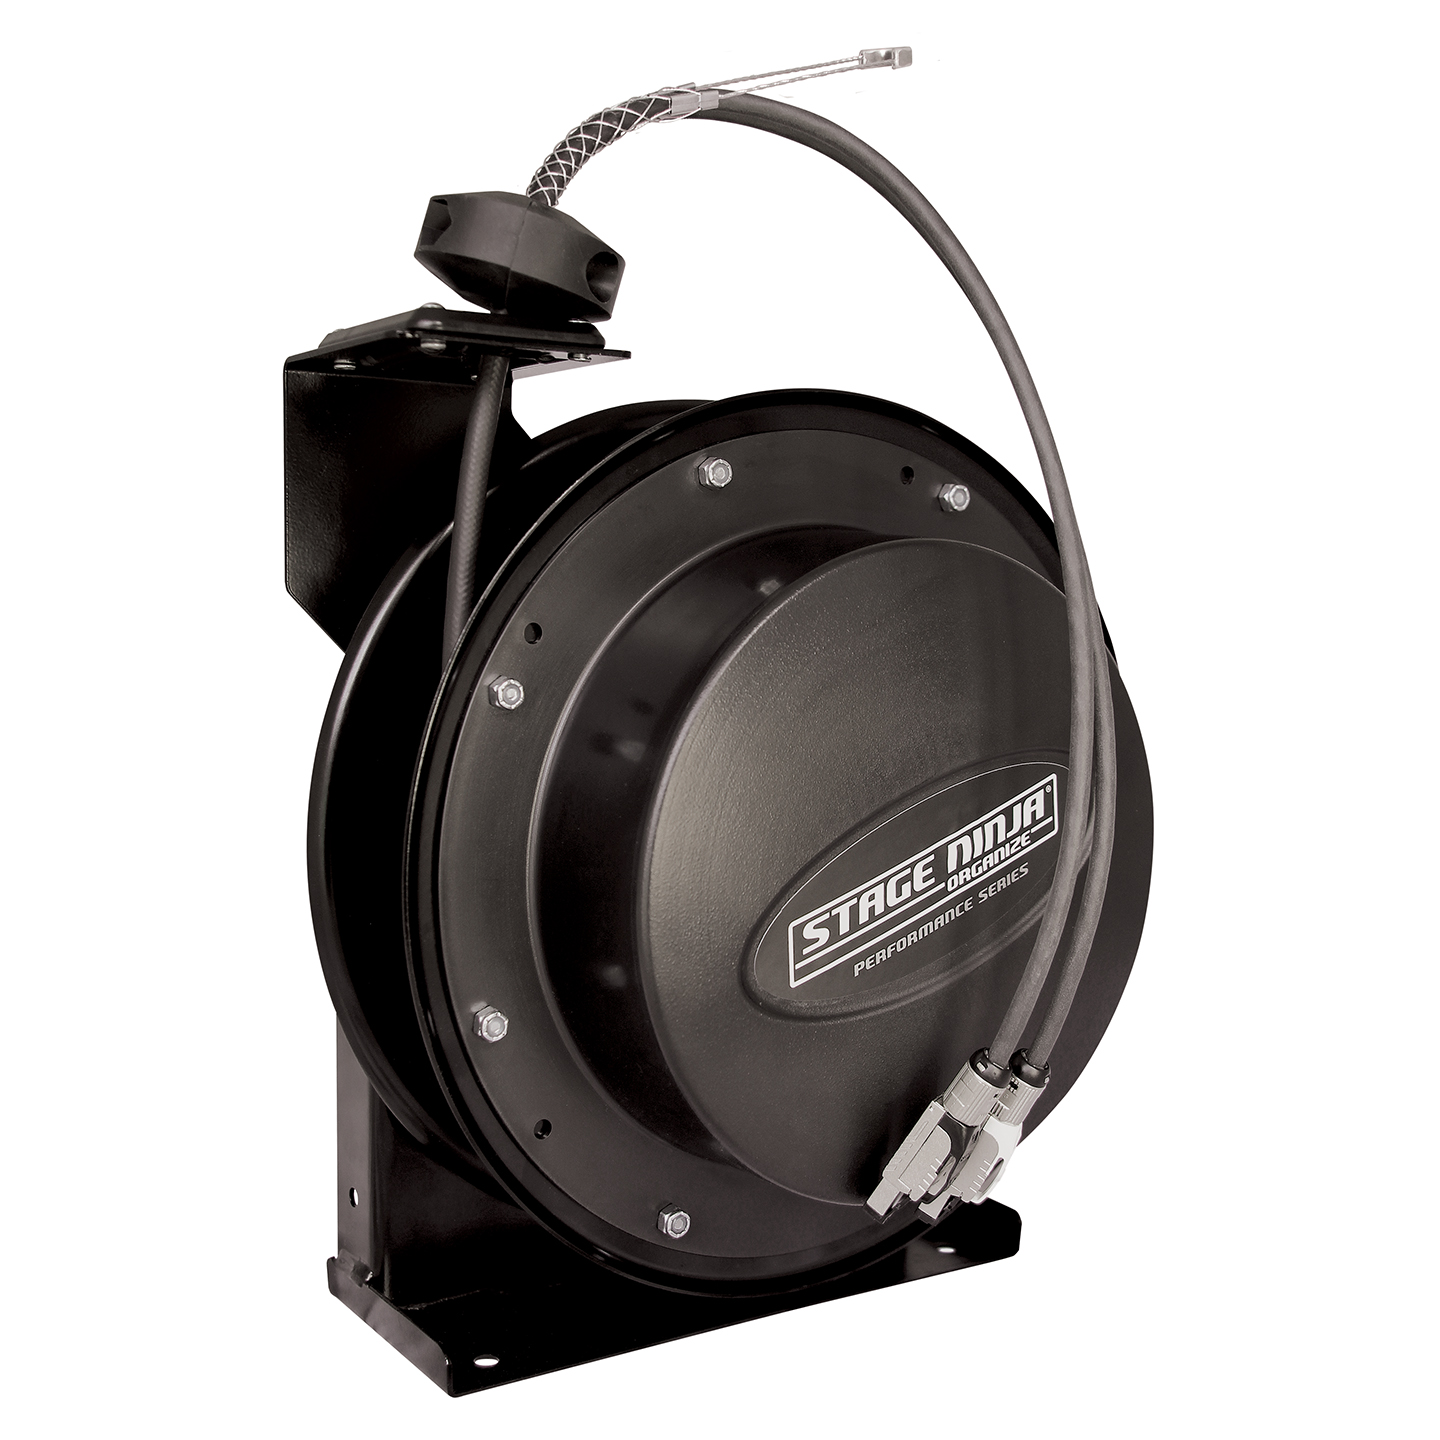 Stage Ninja ETH-20-S Retractable Ethernet Cable Reel - Gray - 20